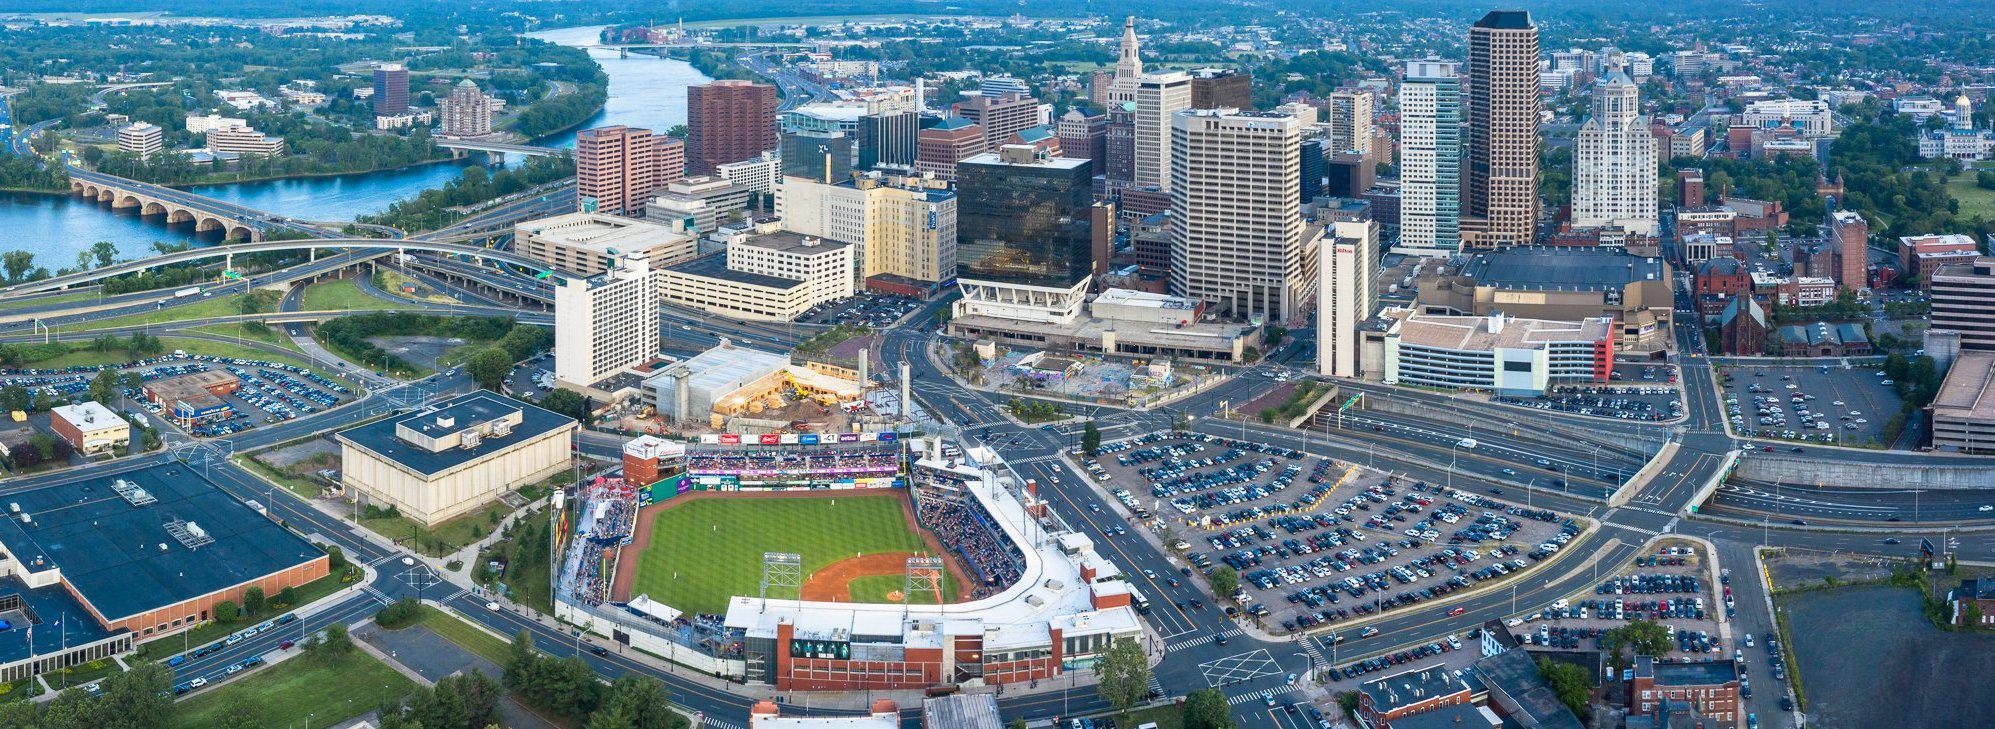 Dunkin' Donuts Park - Newman Architects